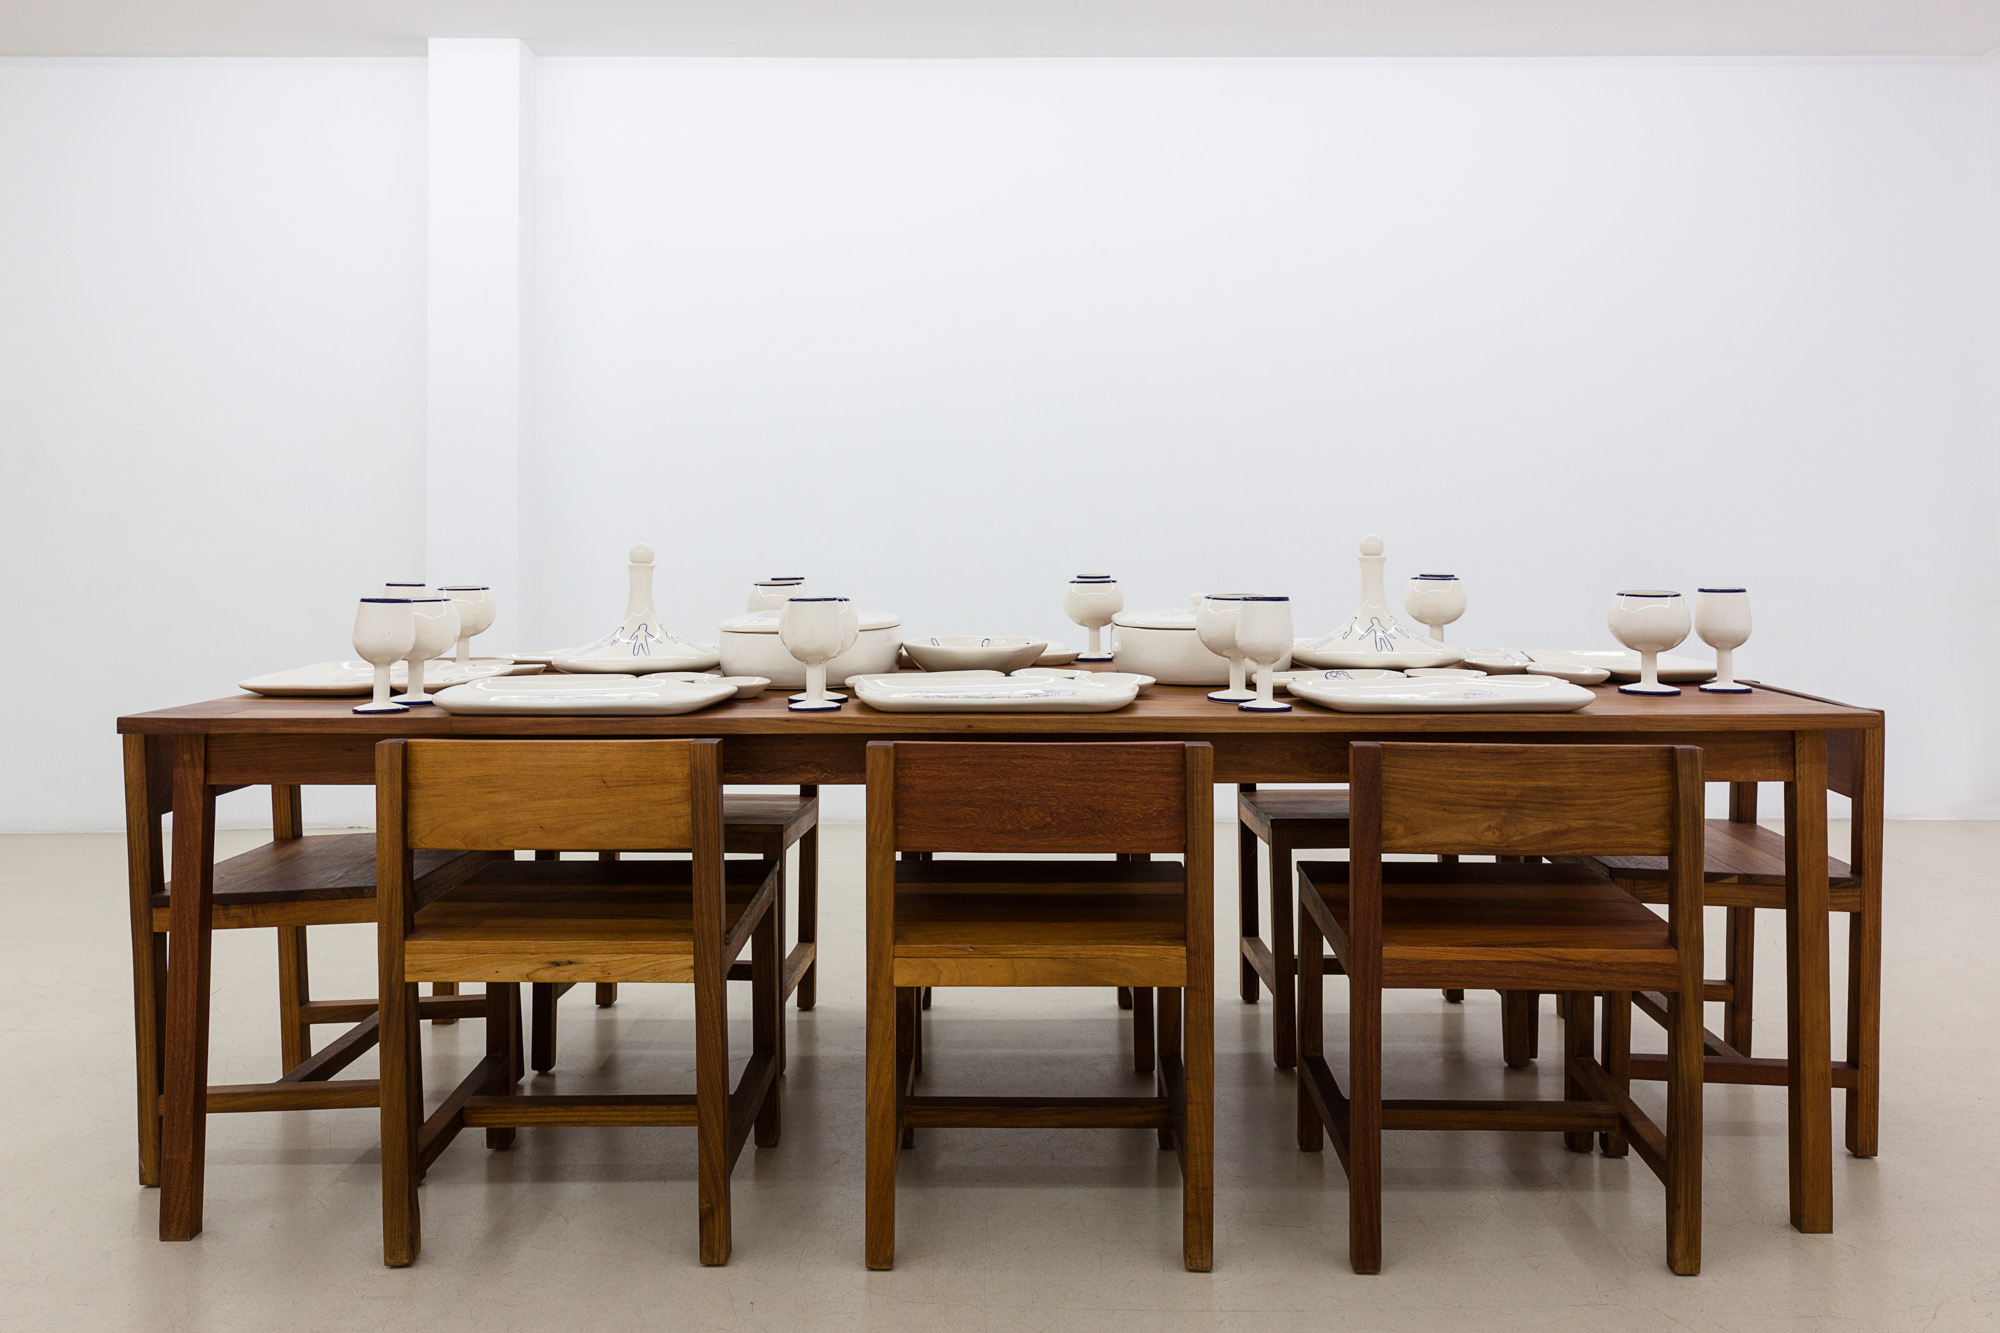 Atelier Van Lieshout, Table with Mexican Crocker + 8 chairs (sweet), 2009